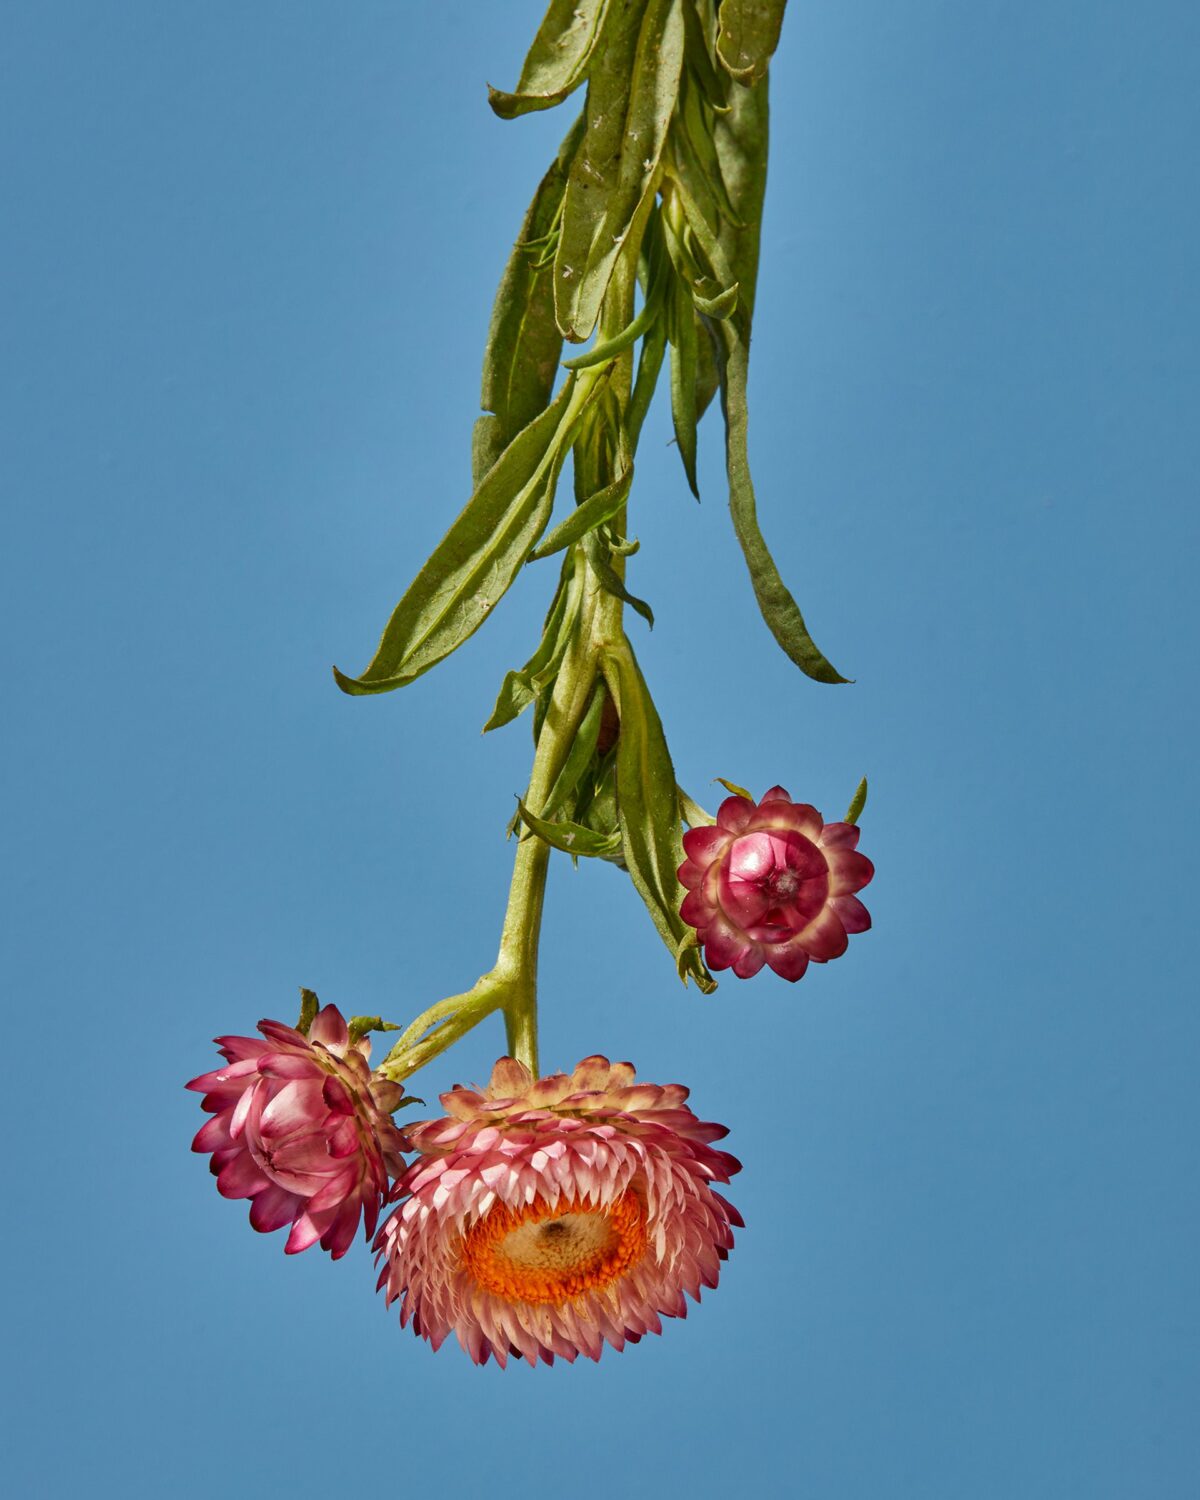 Upside Down Nature Superb Flower Photography Series By Magali Polverino And Pato Katz 3